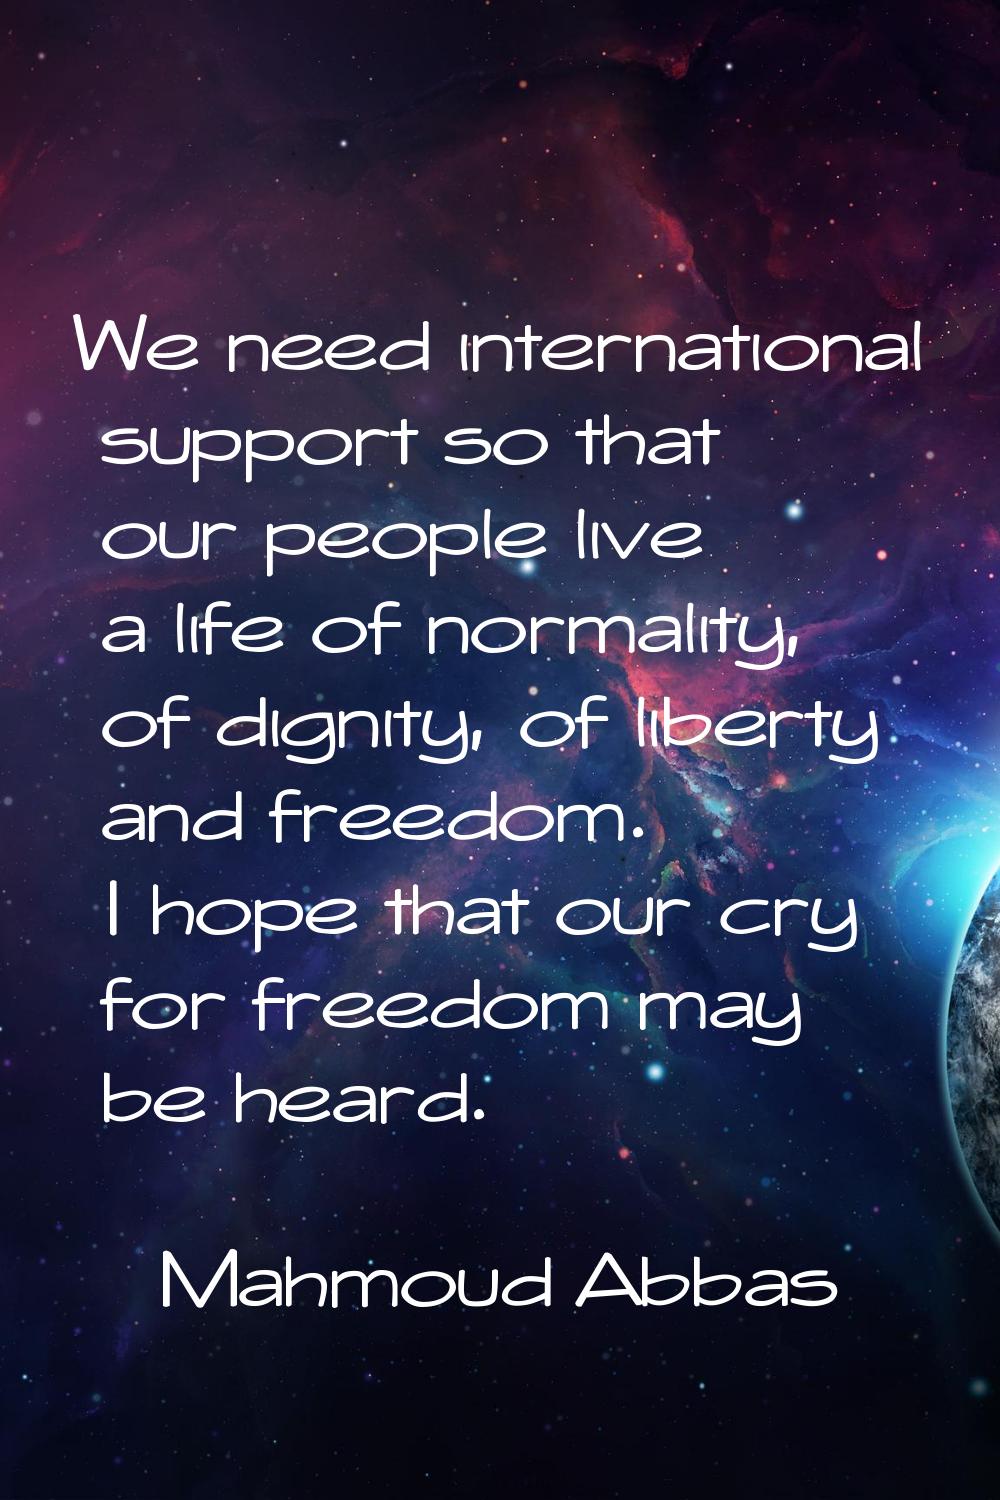 We need international support so that our people live a life of normality, of dignity, of liberty a